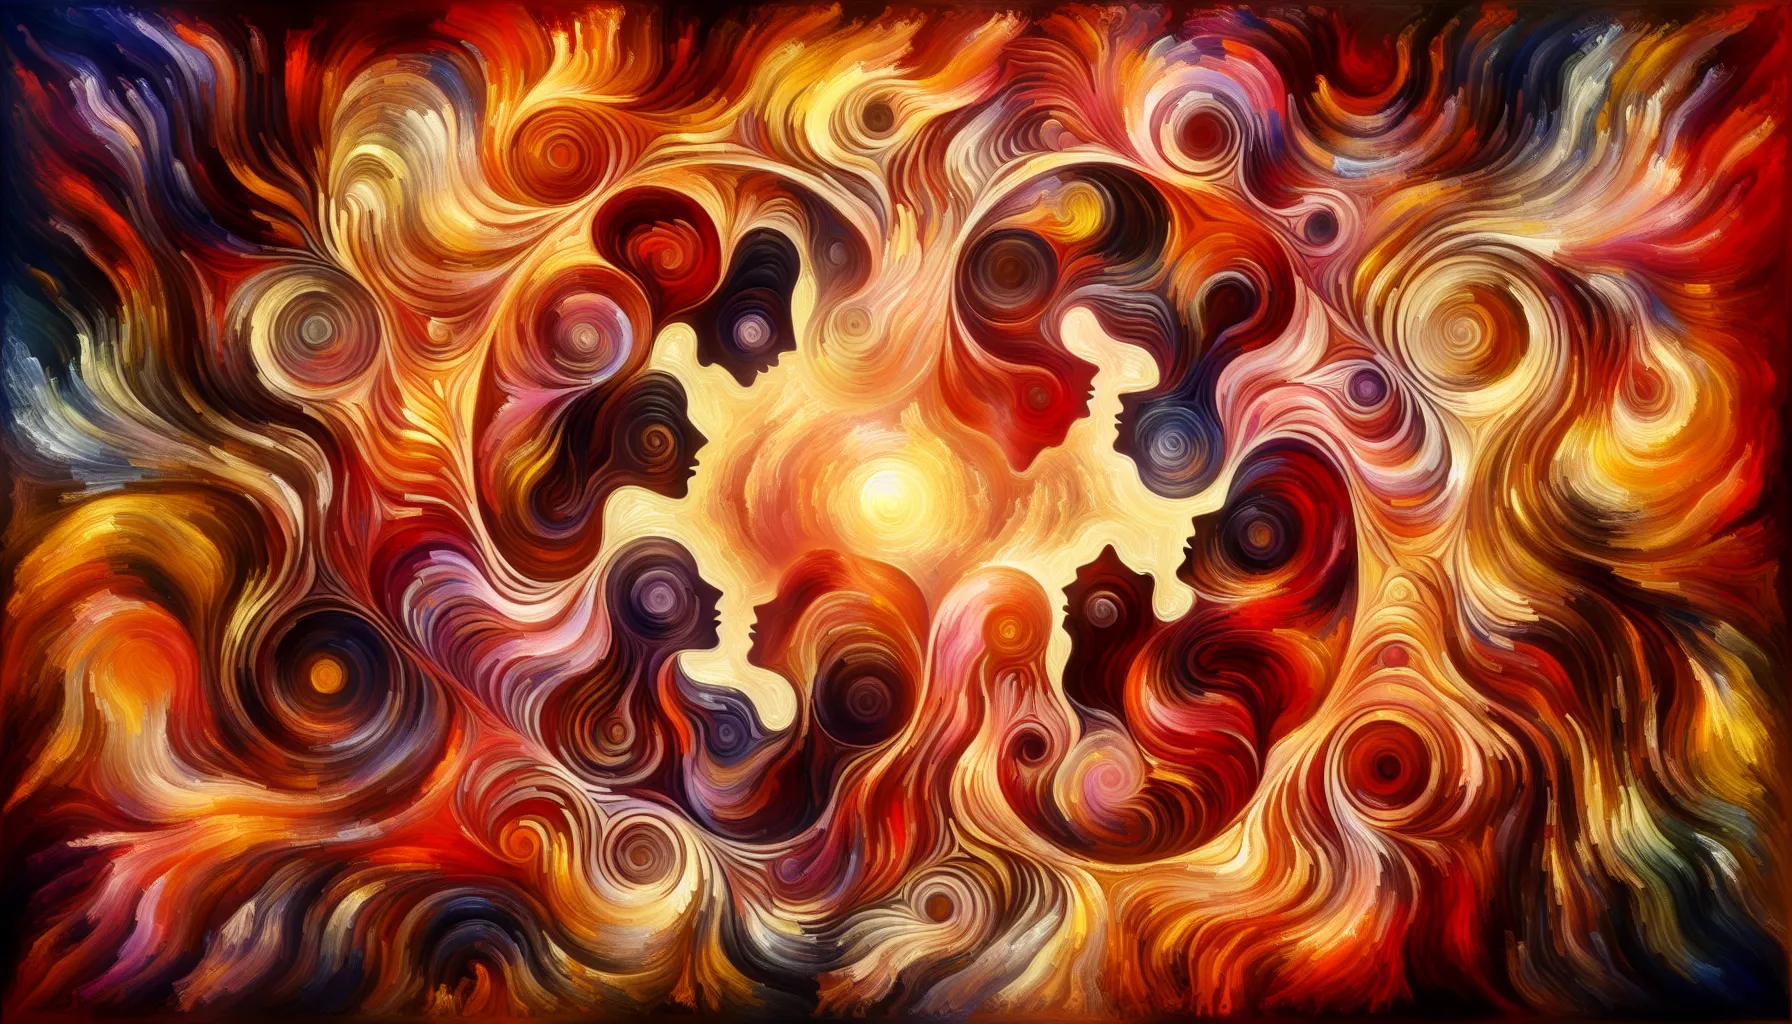 In the dance of connection, our emotions intertwine, creating a tapestry of warmth and complexity. This visual metaphor captures the essence of our deepest desires for understanding and affinity, mirroring the intricate journey we embark upon in the search for meaningful bonds.